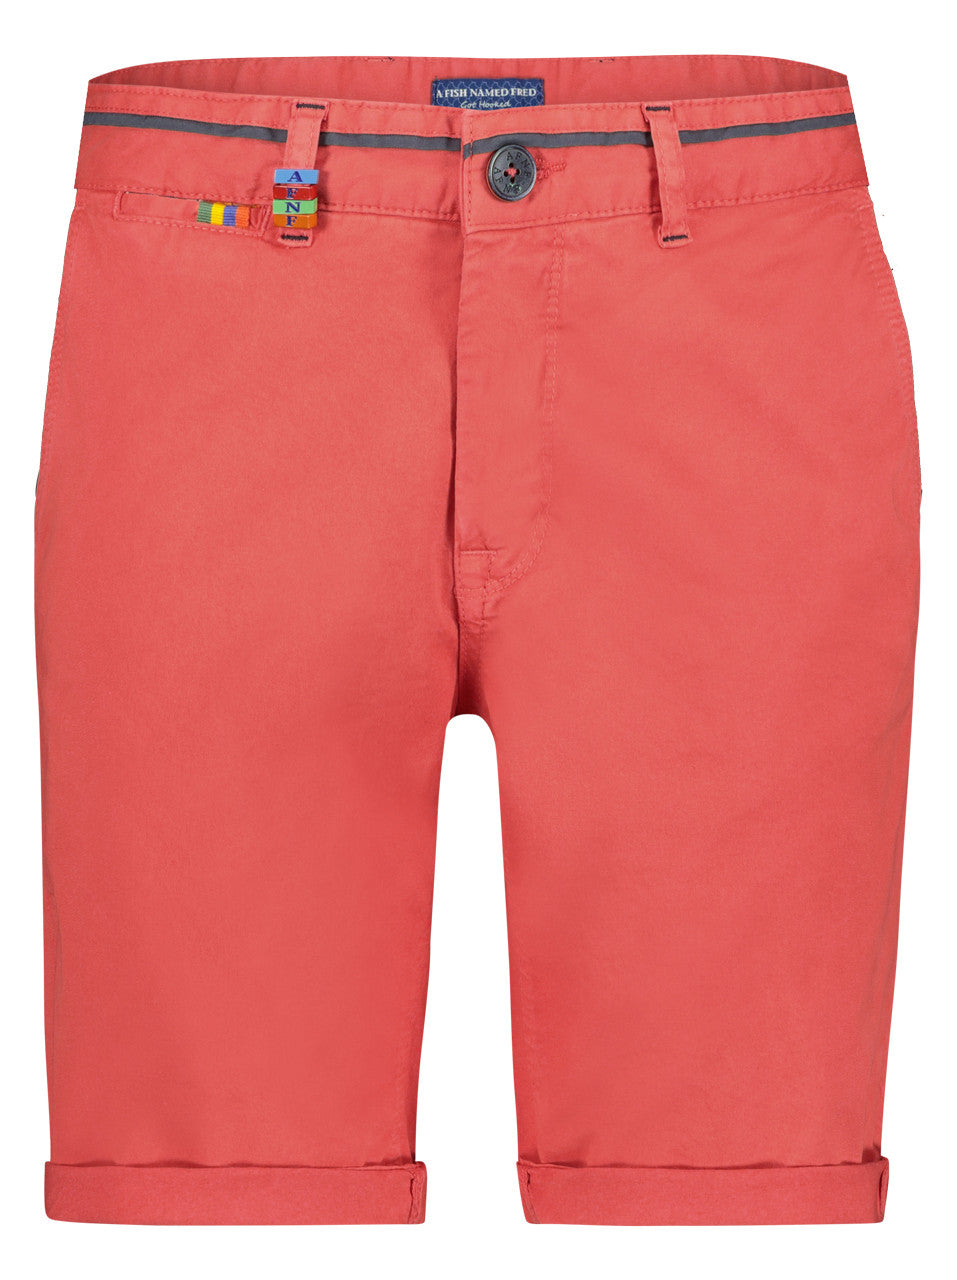 A Fish Named Fred Bermuda Shorts | Red